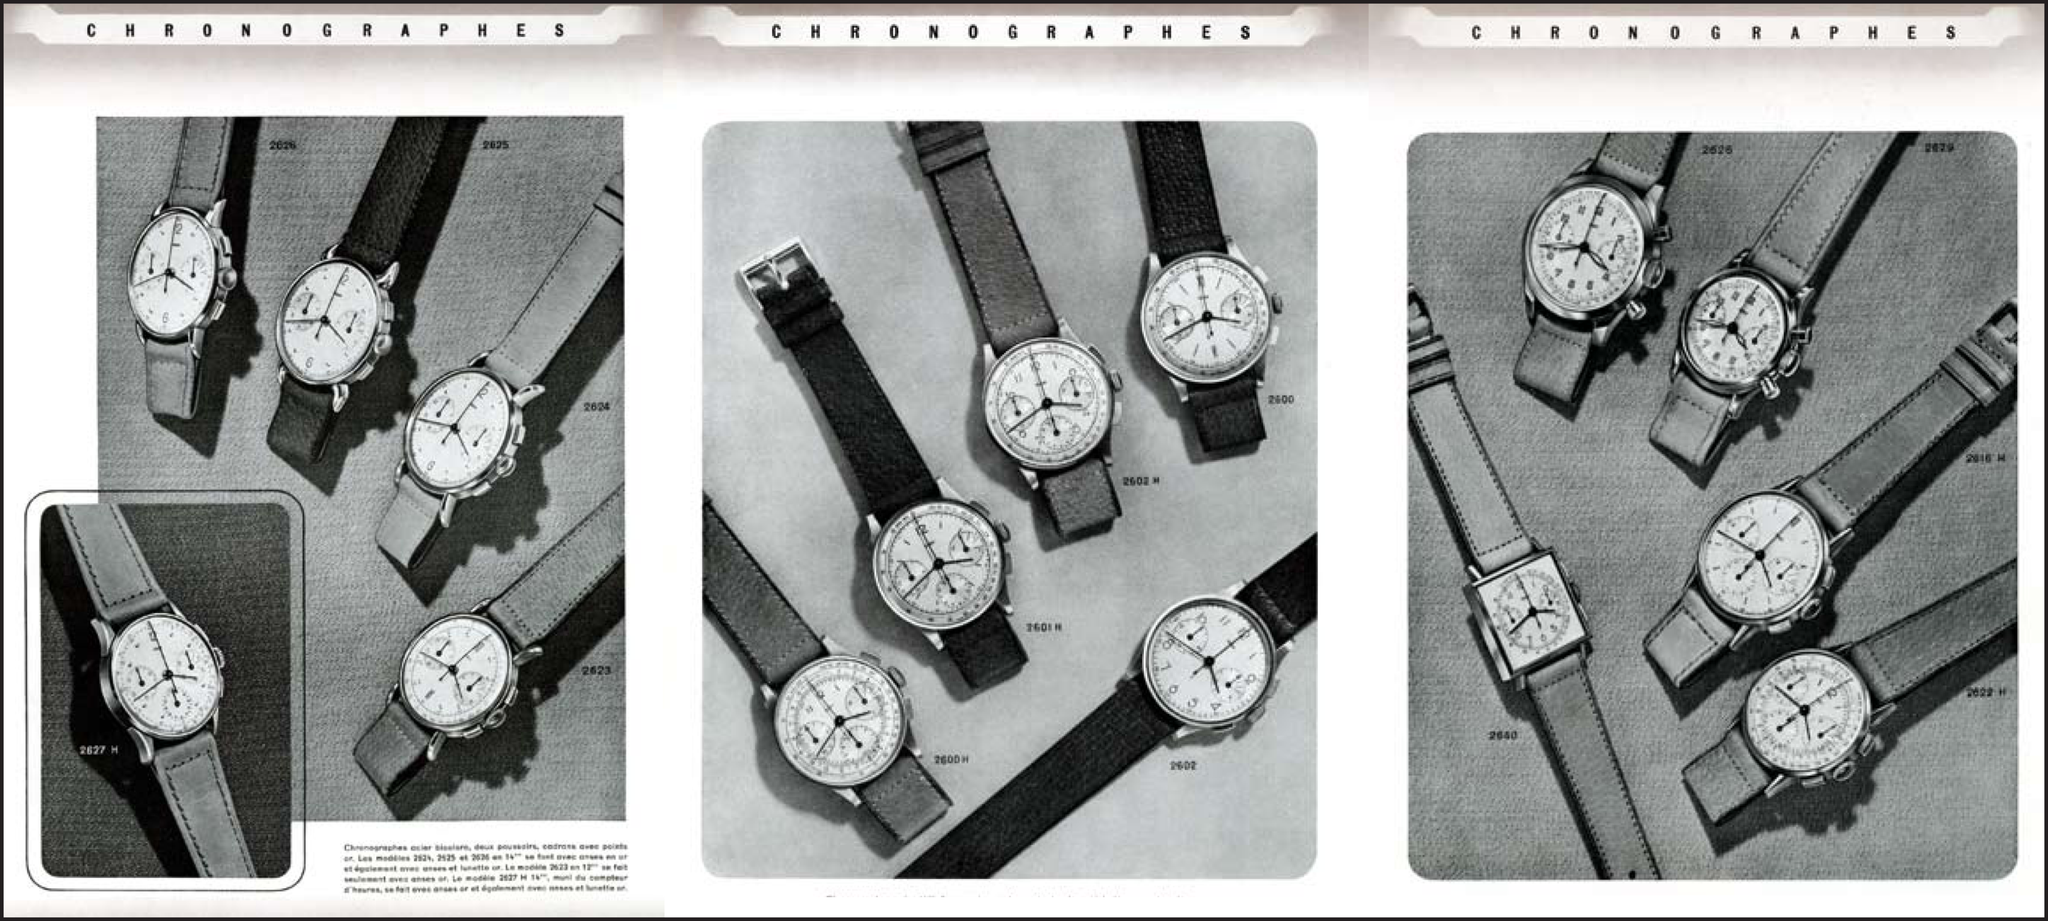 Jaeger chronograph advertorial from the mid 20th Century